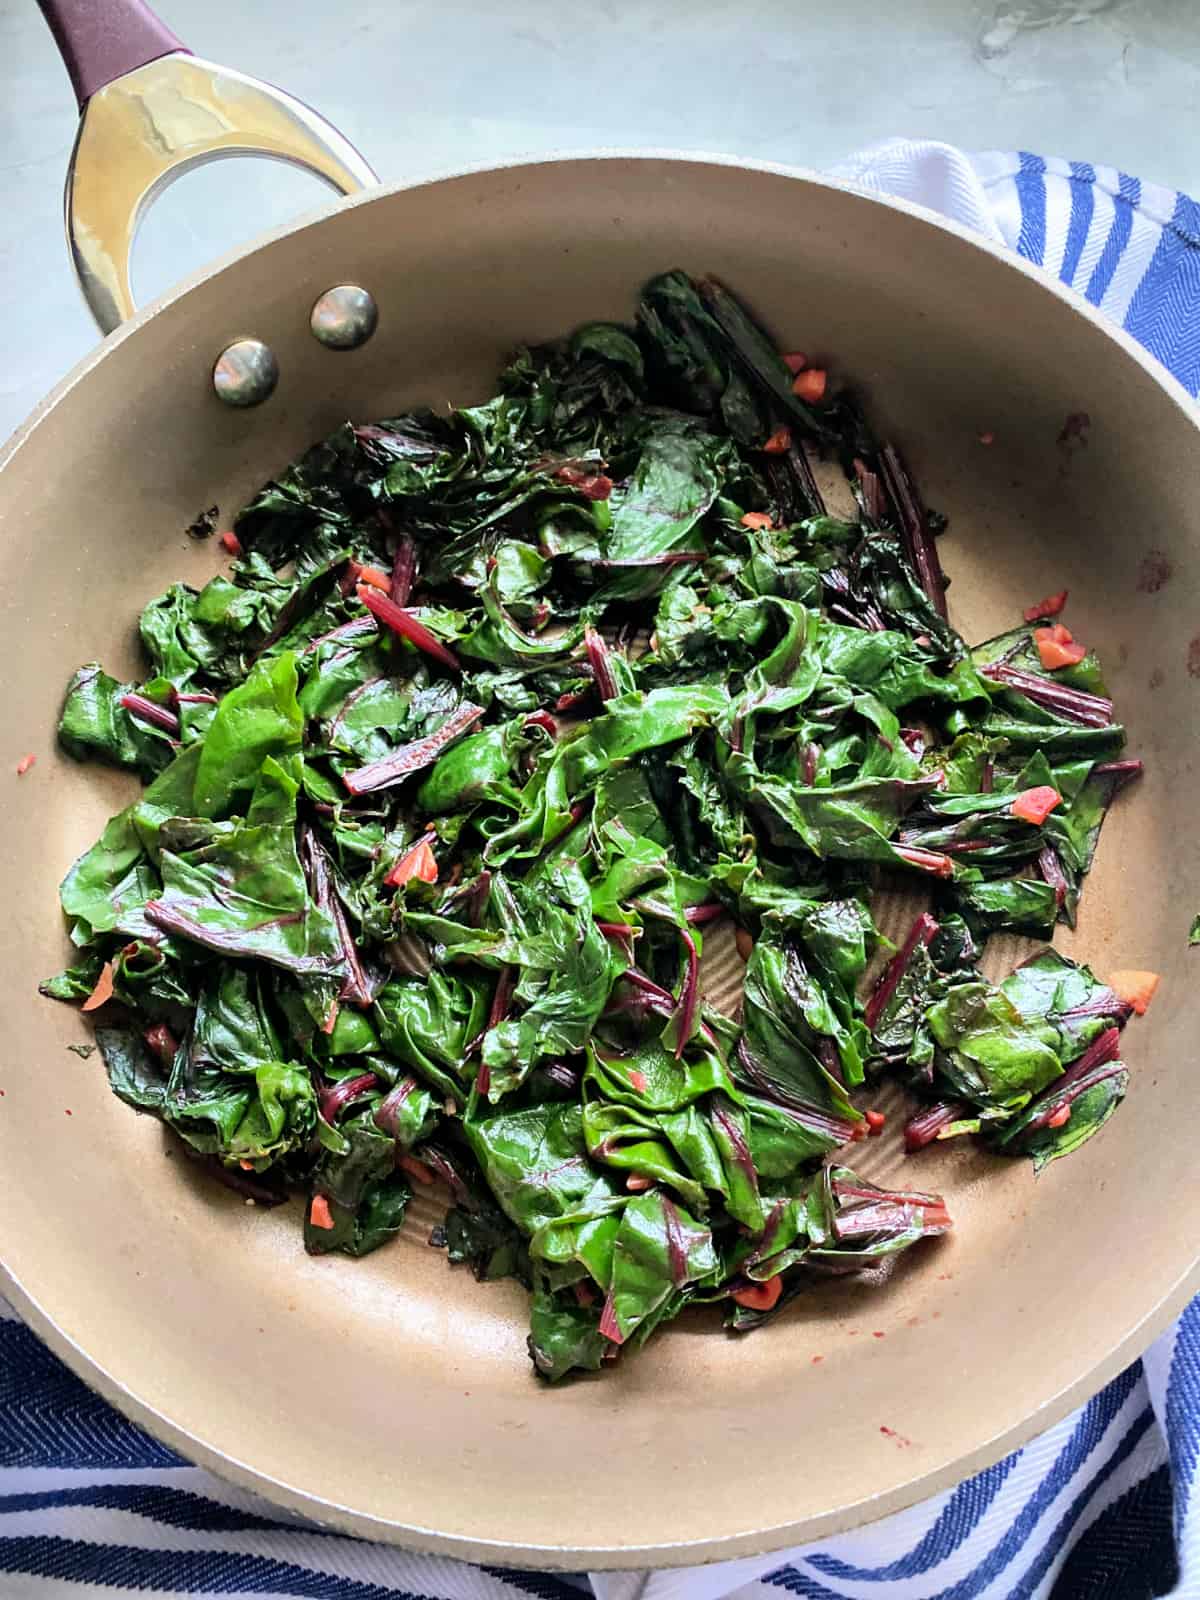 Sauteed greens with chopped garlic in a brown saute pan.